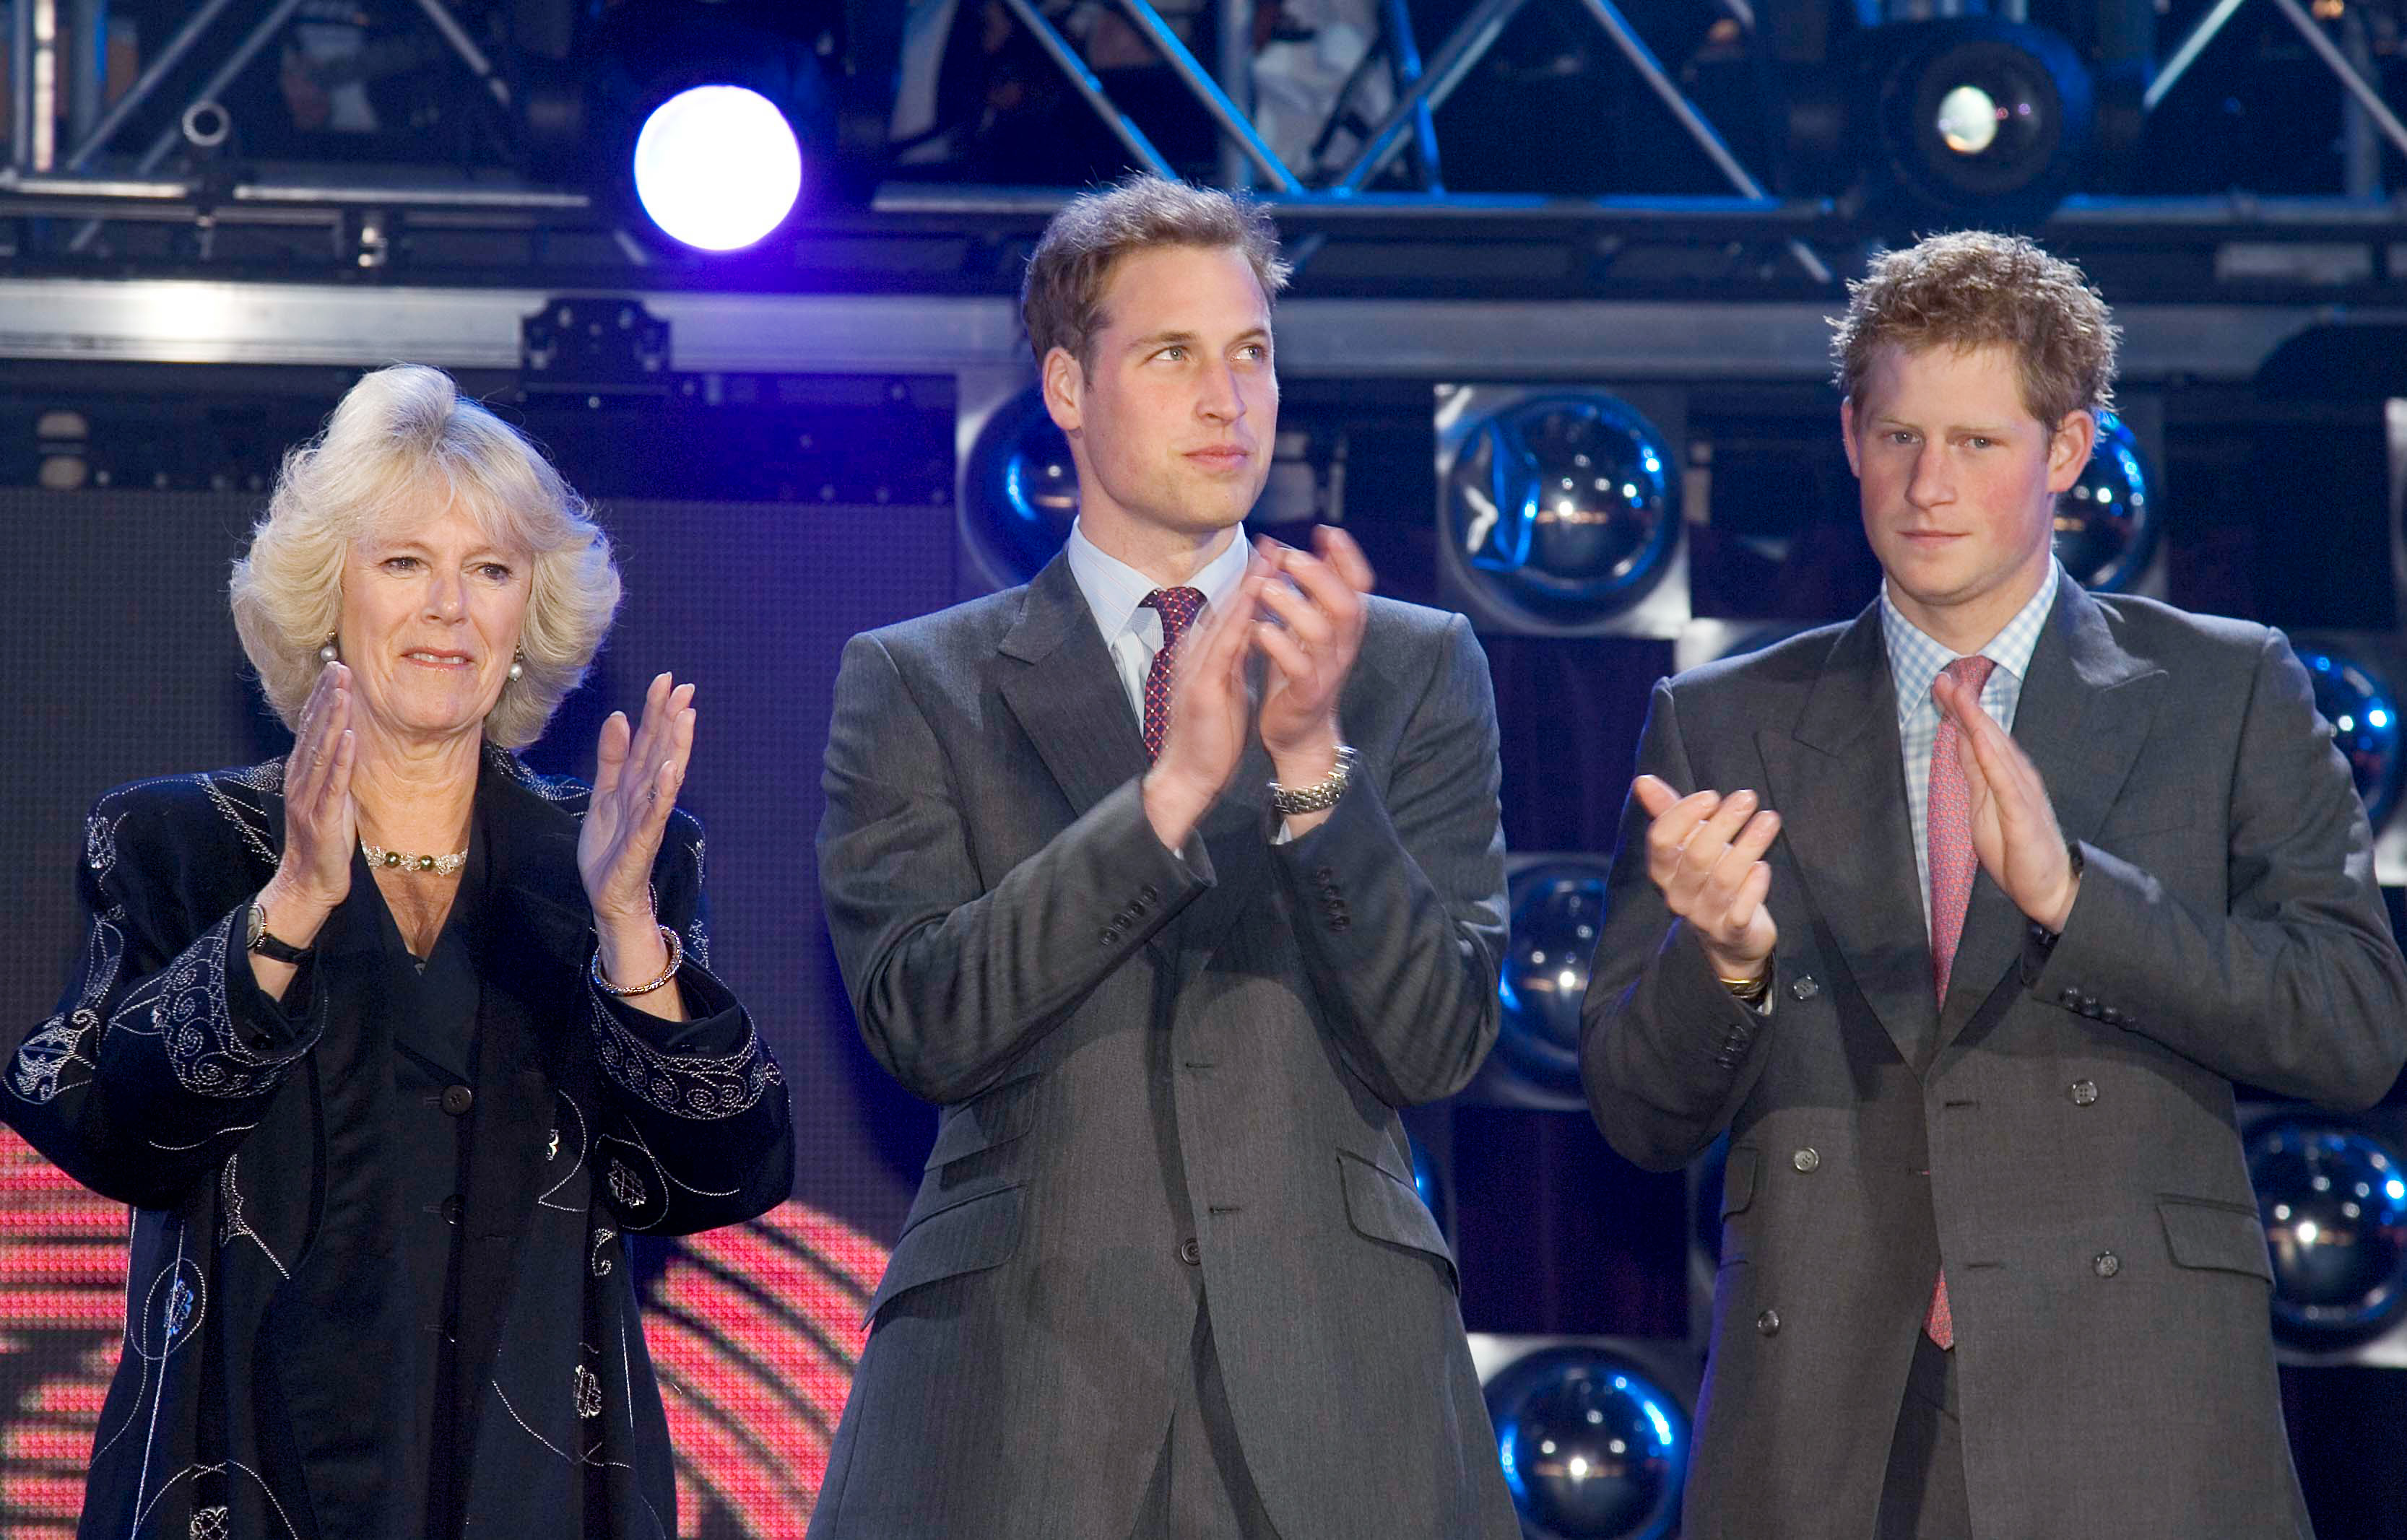 Queen Camilla, Prince William and Prince Harry at the 30th Anniversary of the Prince's Trust Charity concert in London, England in 2006. | Source: Getty Images